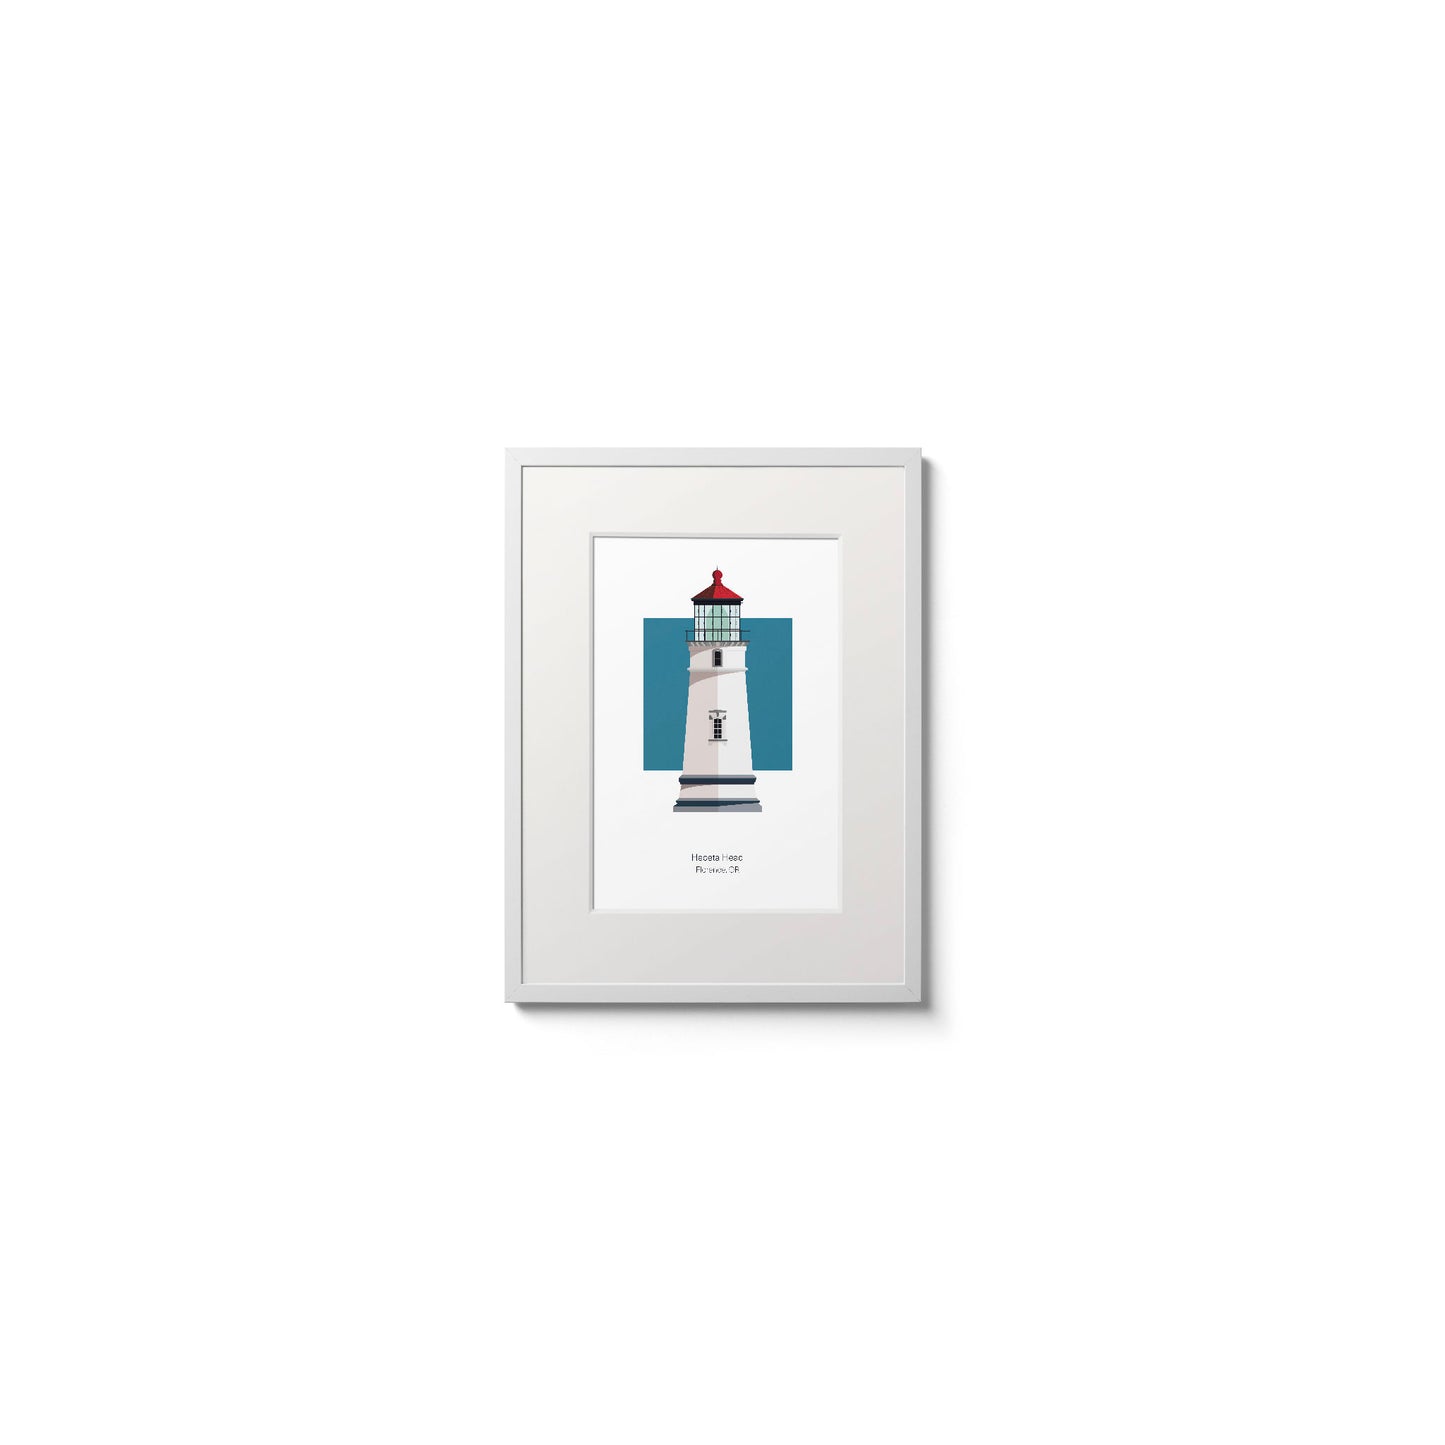 Illustration of the Heceta Head lighthouse, Oregon, USA. On a white background with aqua blue square as a backdrop., in a white frame  and measuring 6"x8" (15x20cm).